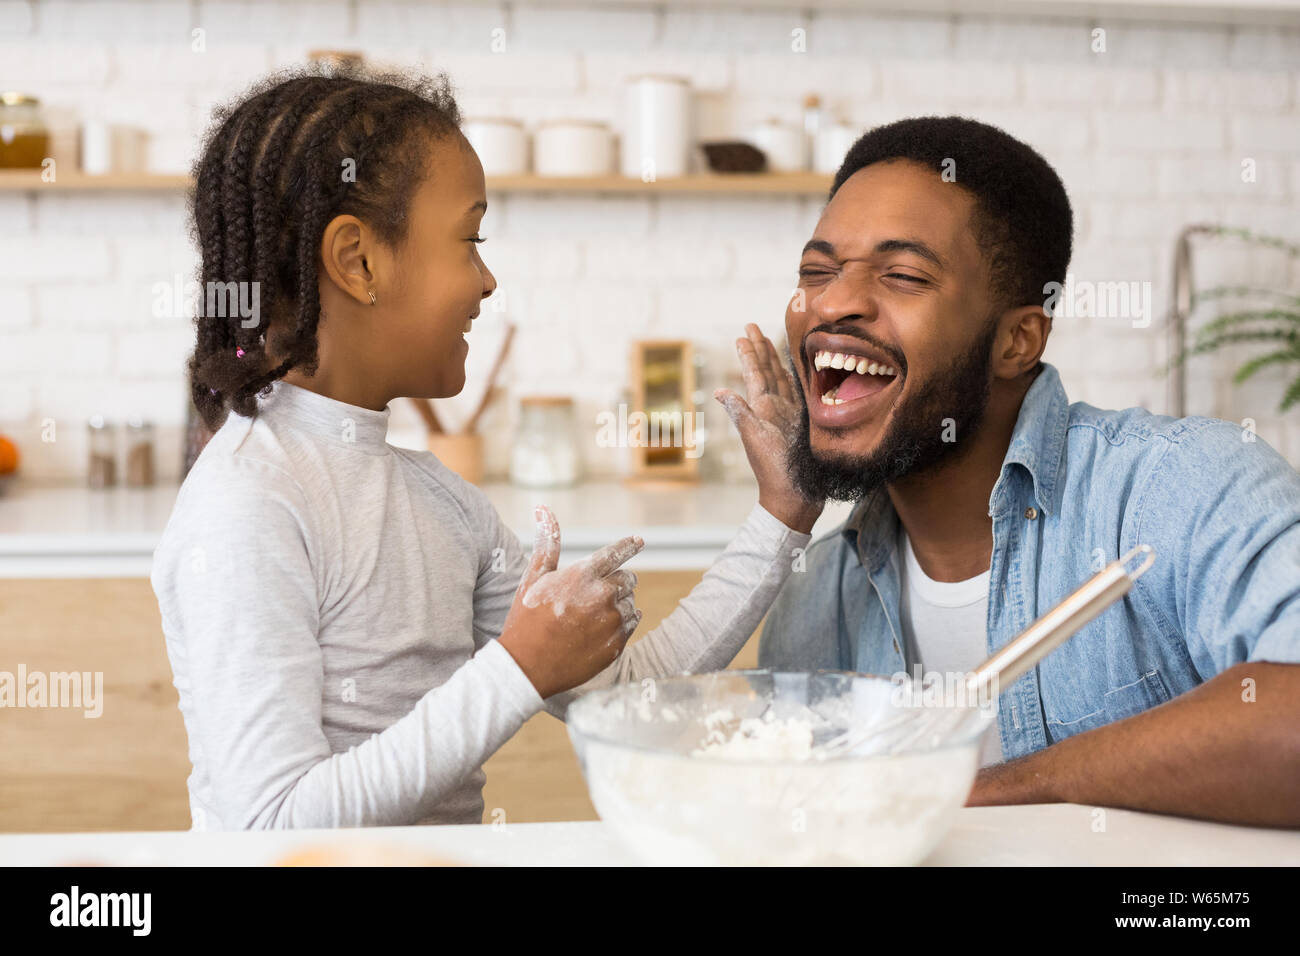 Little afro girl and her dad enjoying making pastry Stock Photo